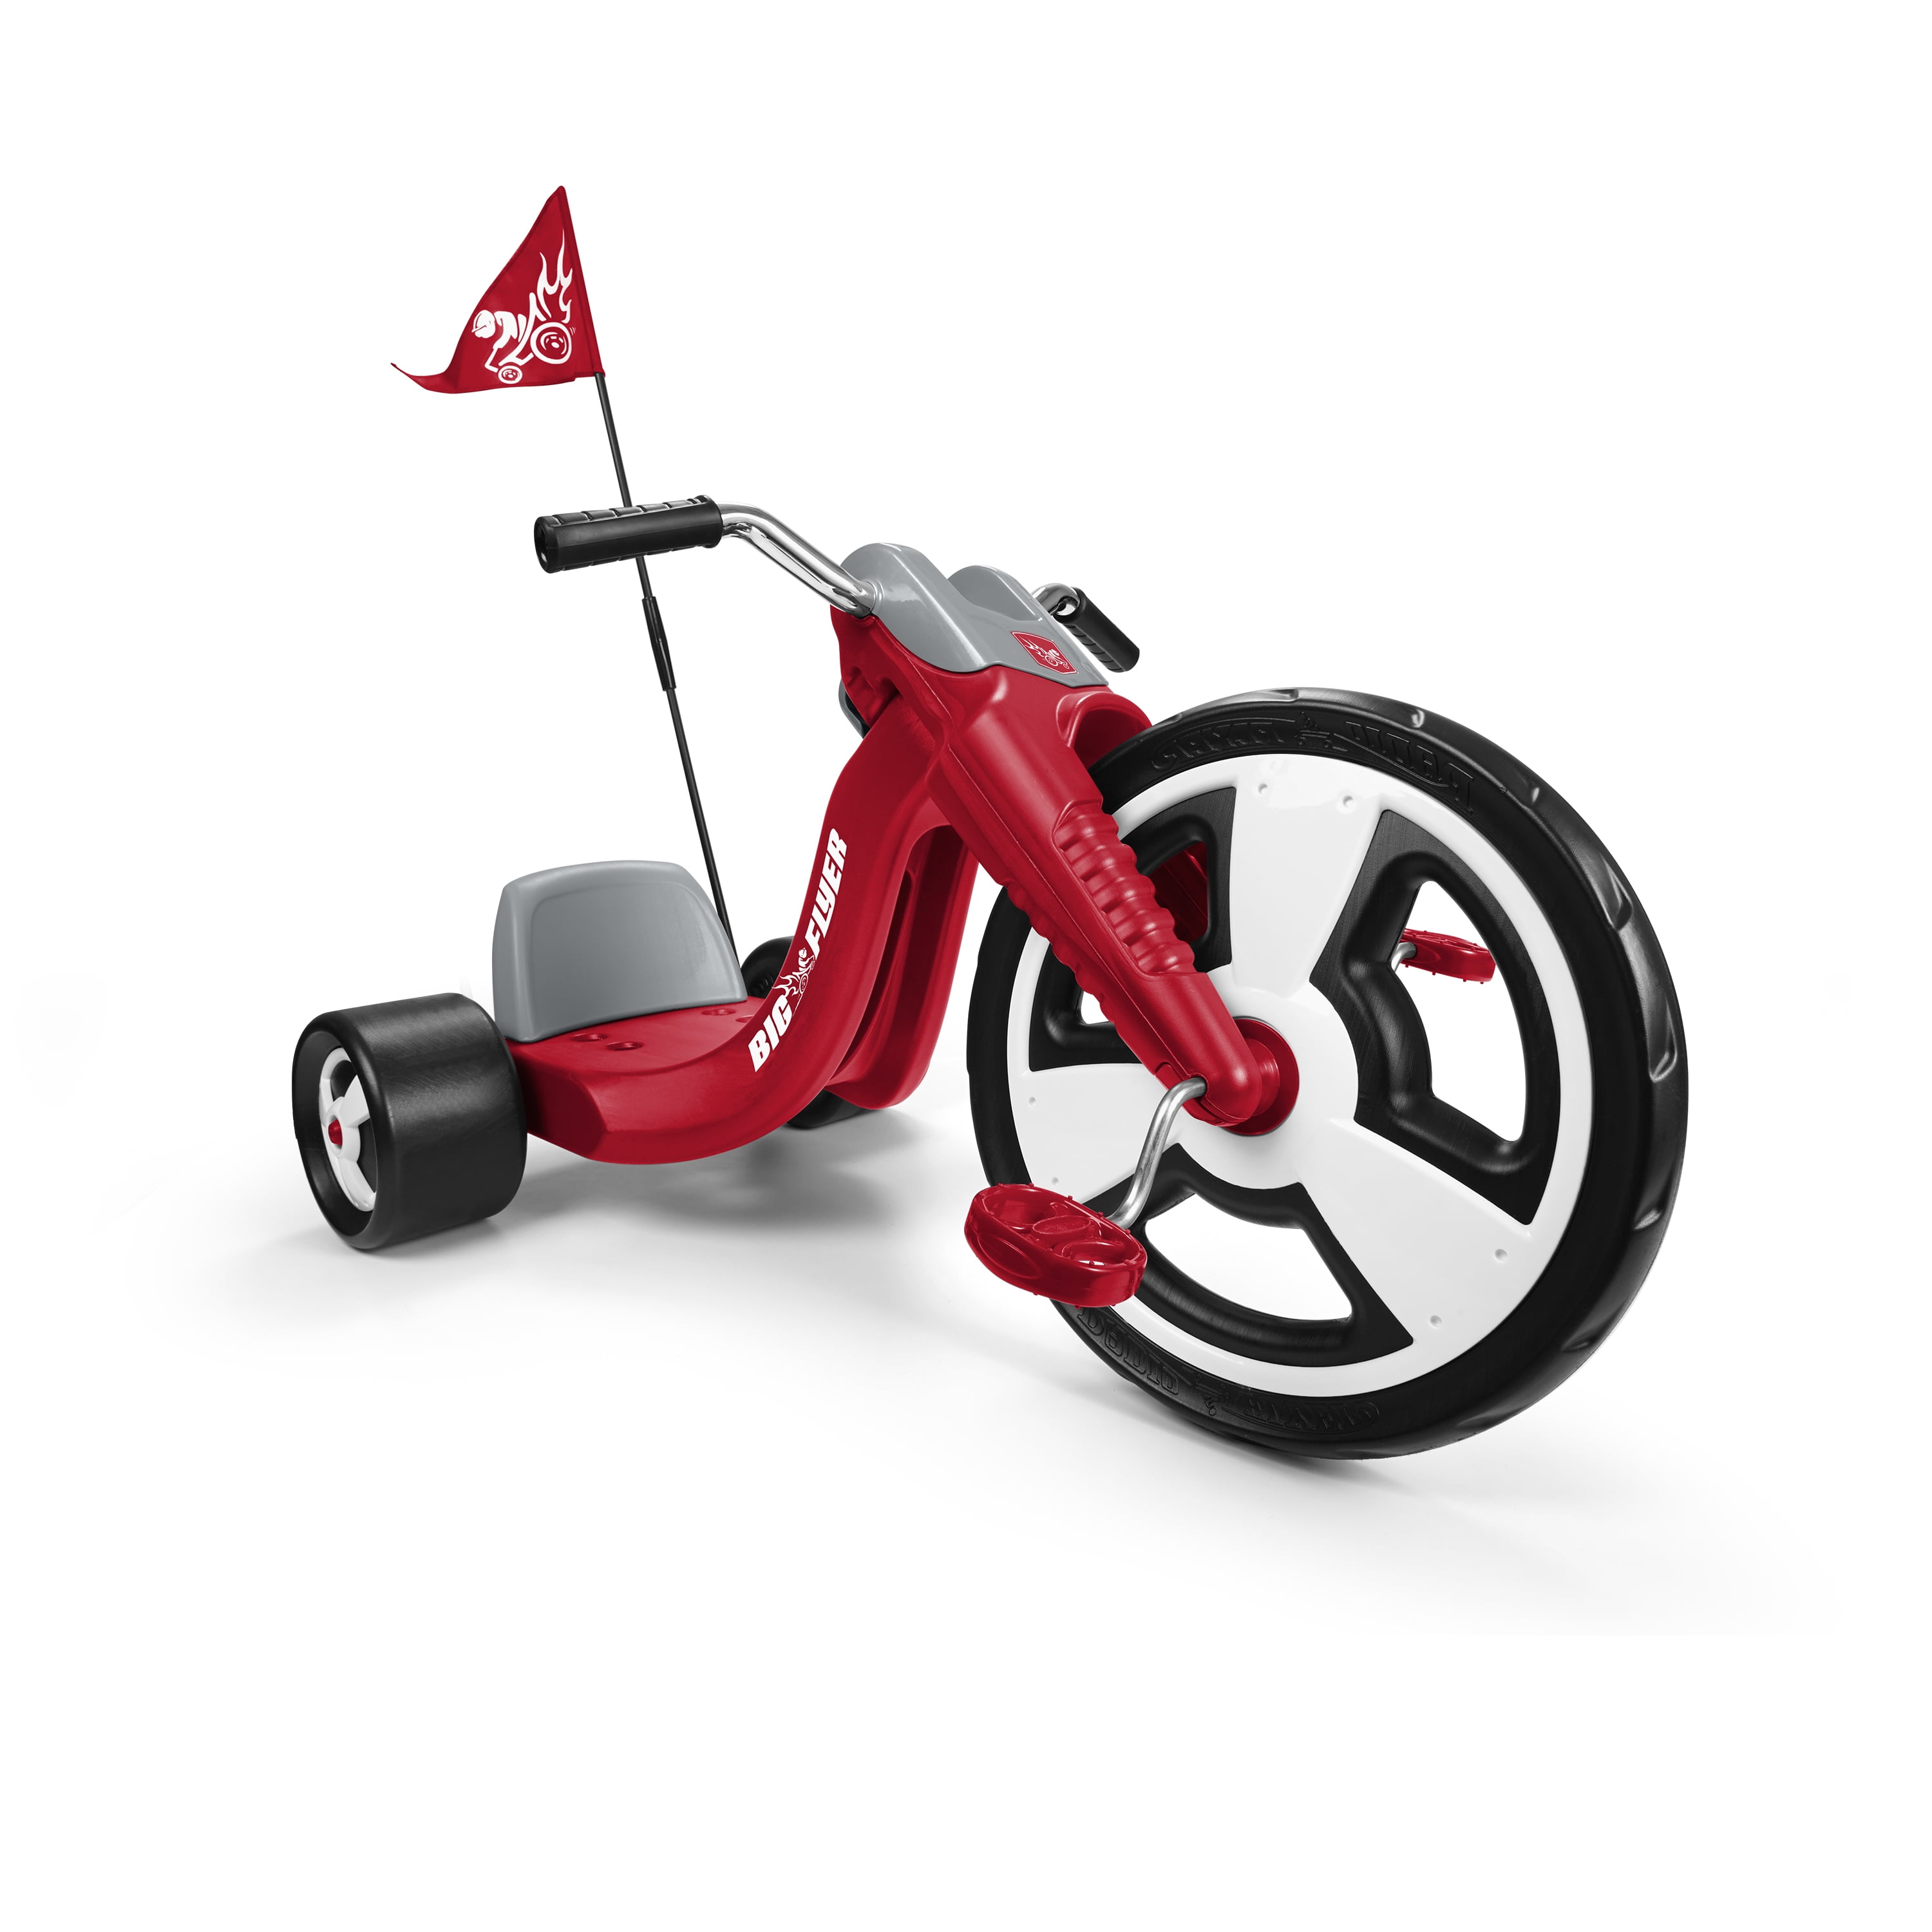 Radio Flyer Big Sport Chopper Tricycle 16 Inch Front Wheel, Red